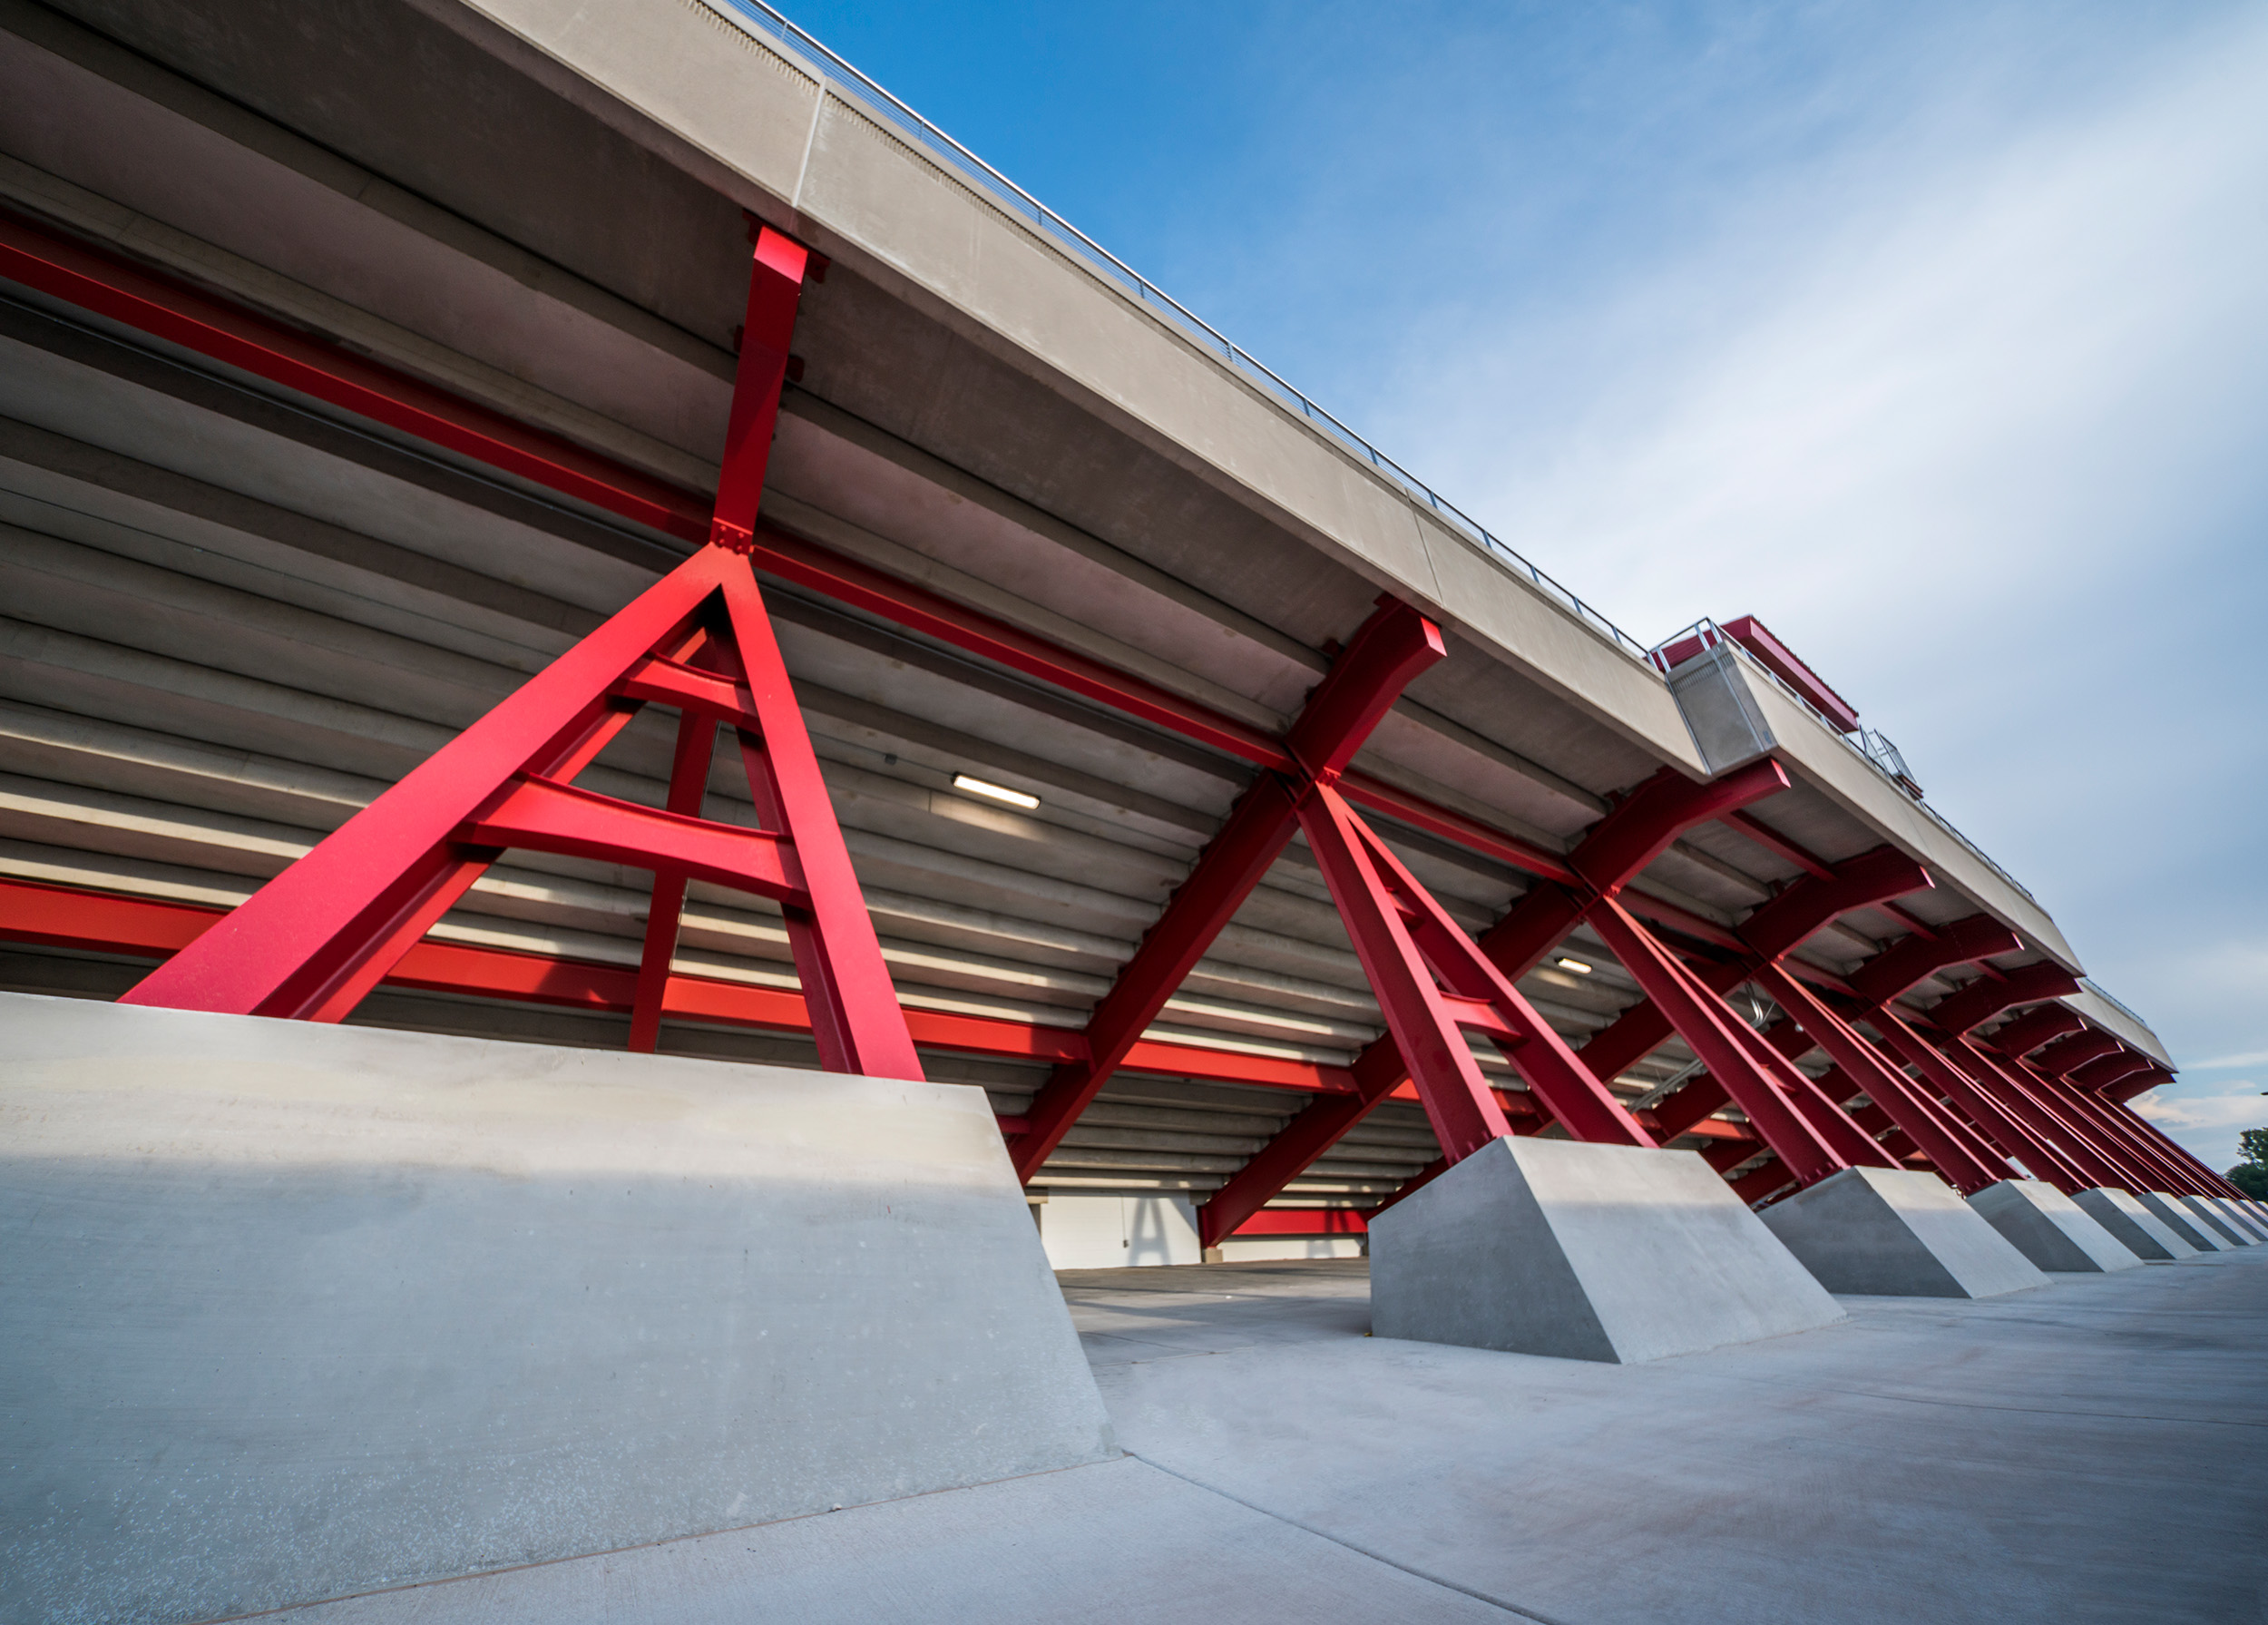 Wilson & Company provided architecture and planning services on the new Eunice Athletic Complex. 